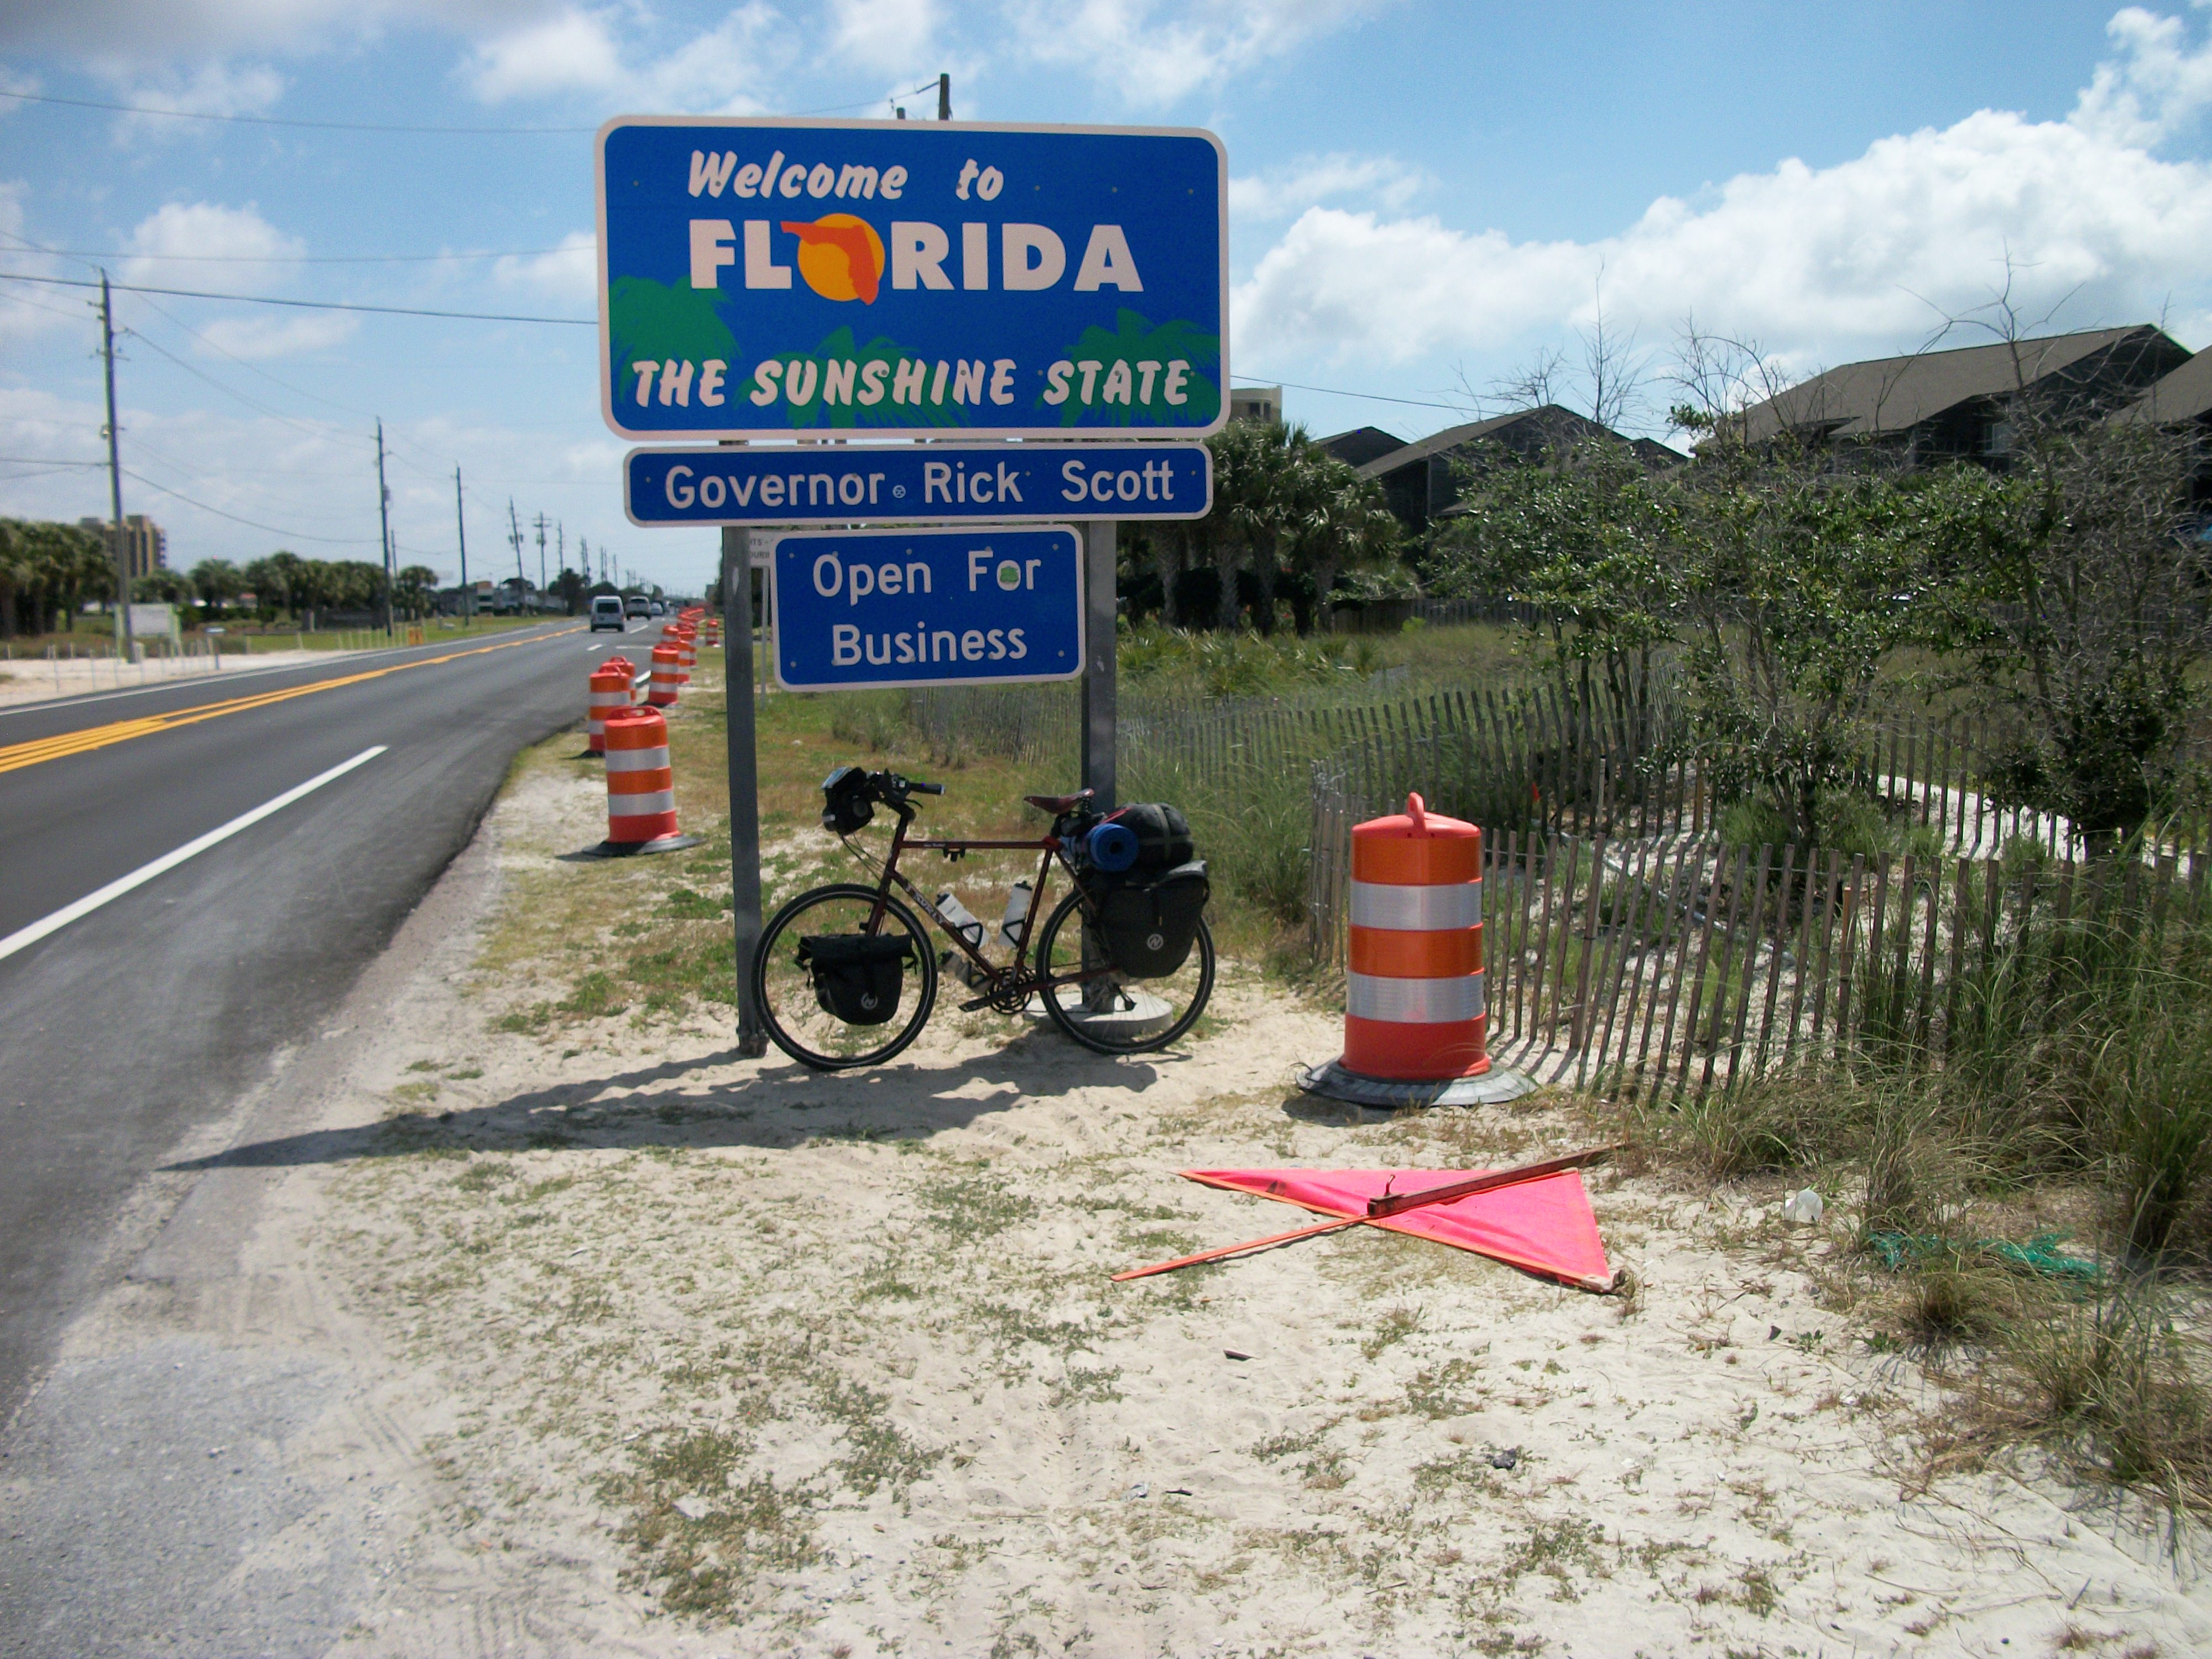 Florida is a pretty big state when you enter the panhandle and ride to the East coast